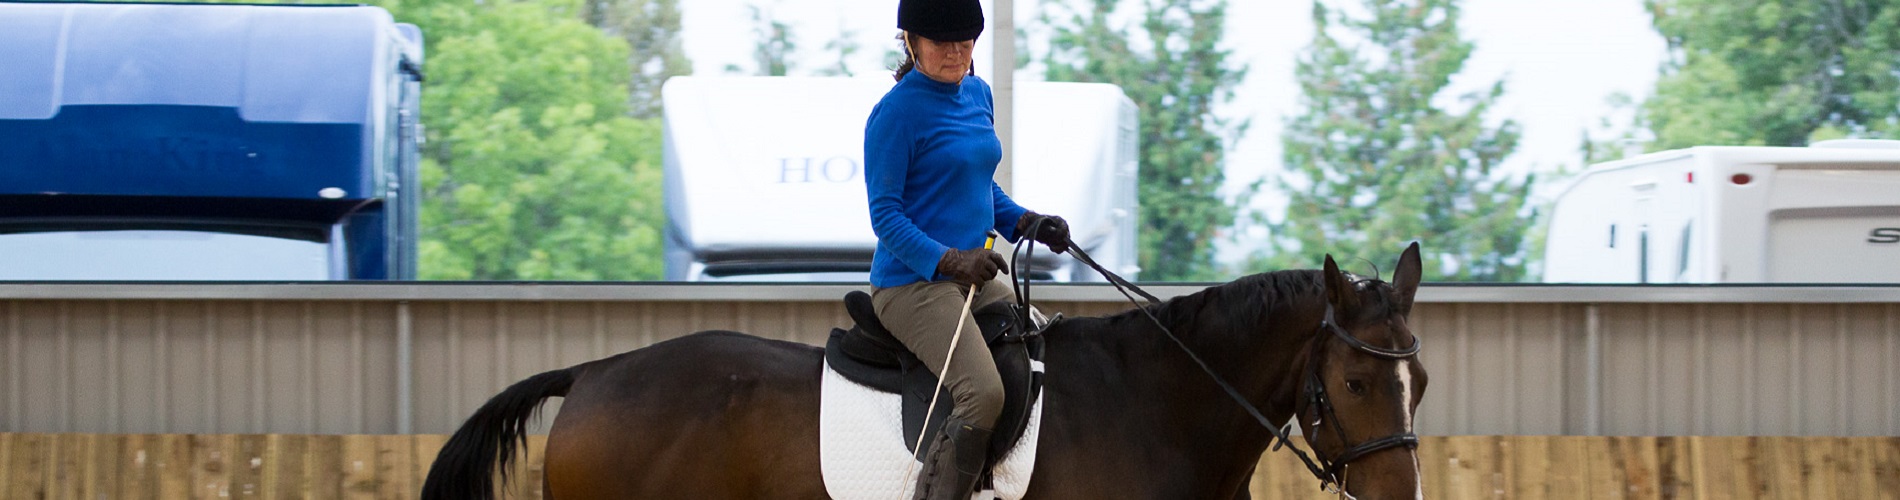 Katherine riding her horse, Conquer at a clinic arranged by Aligned Balanced Connected